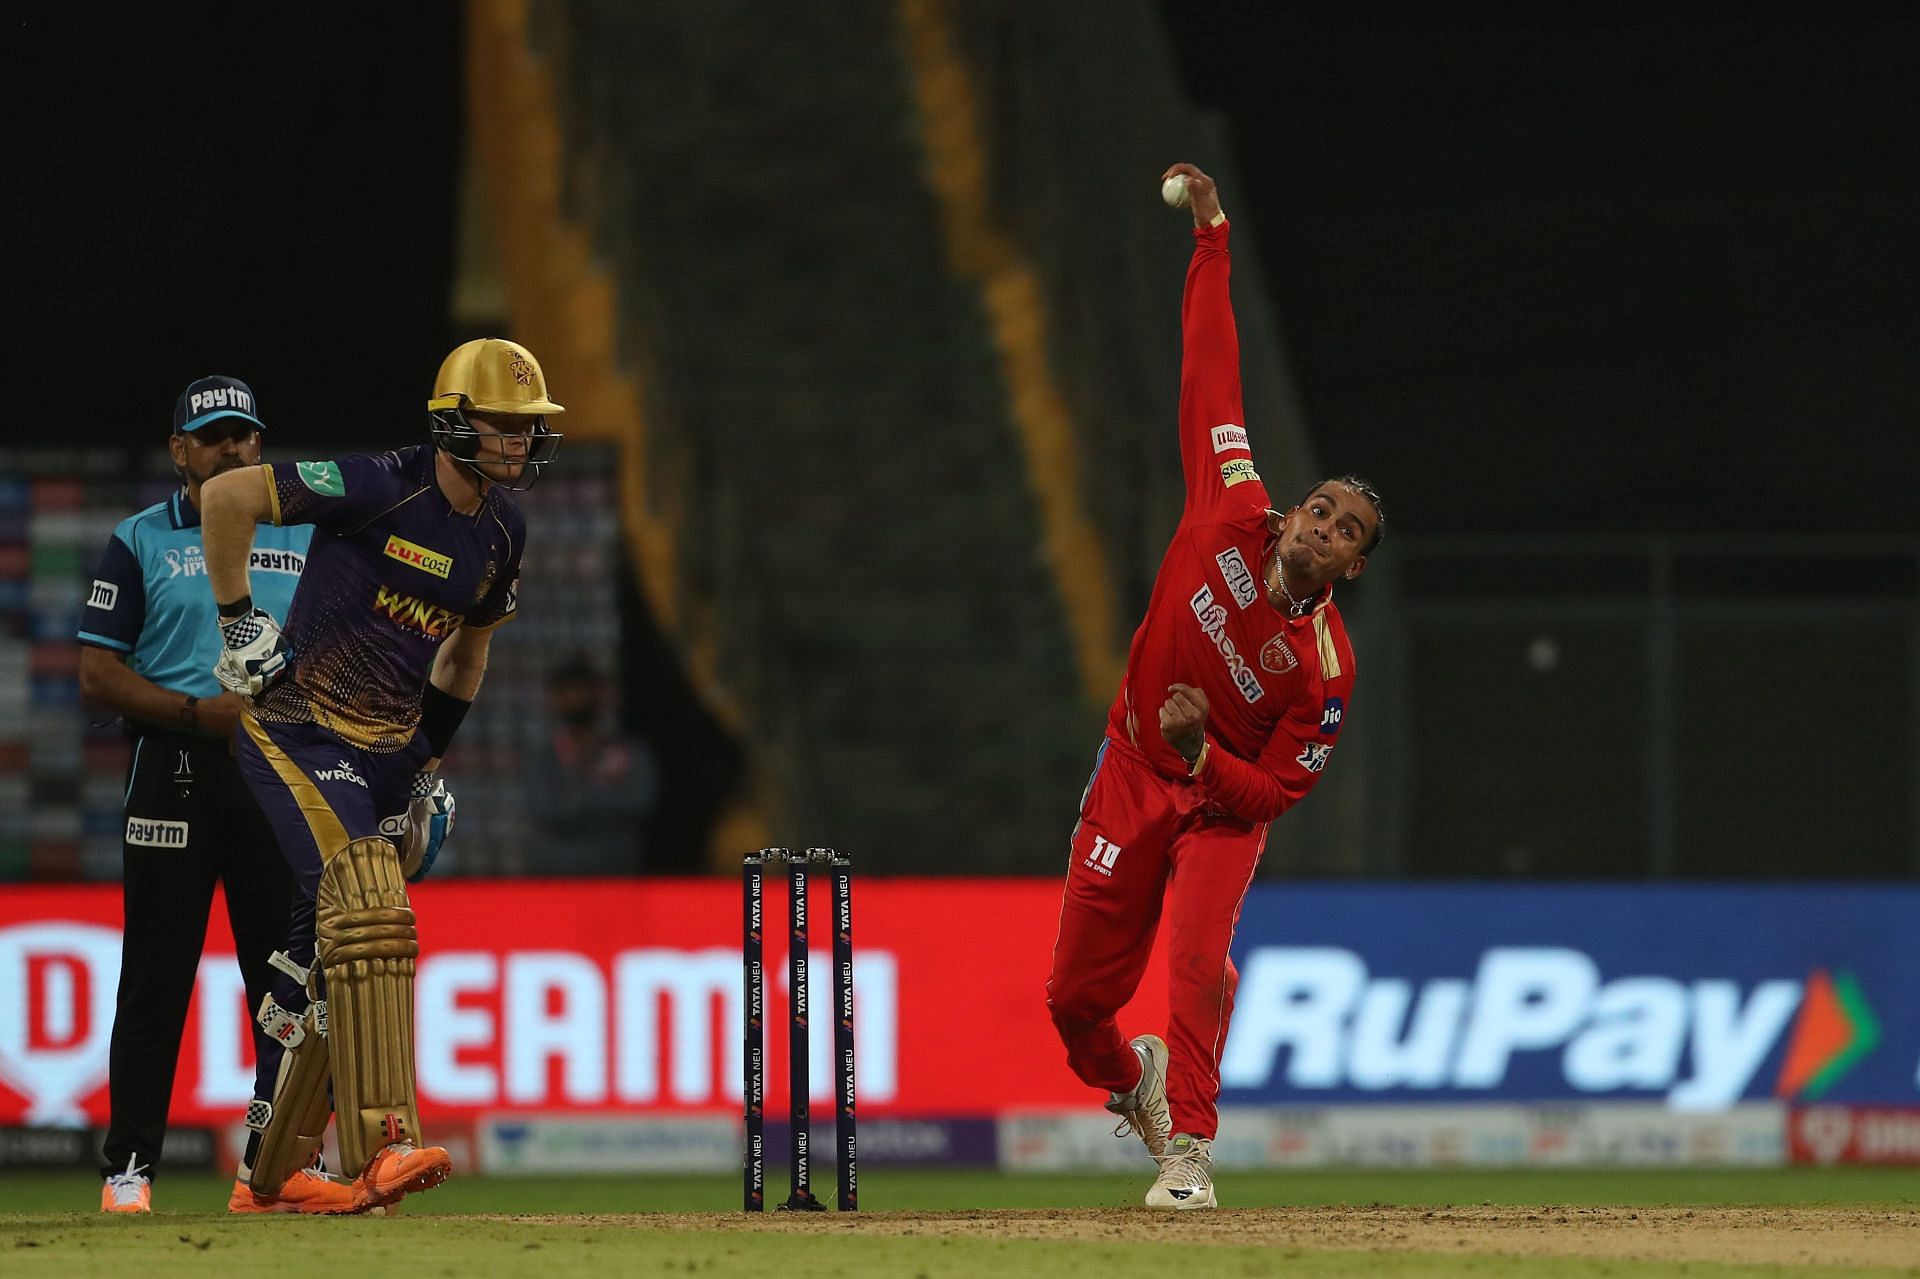 Rahul Chahar had a decent run for the Punjab Kings, finishing as their second-highest wicket-taker.